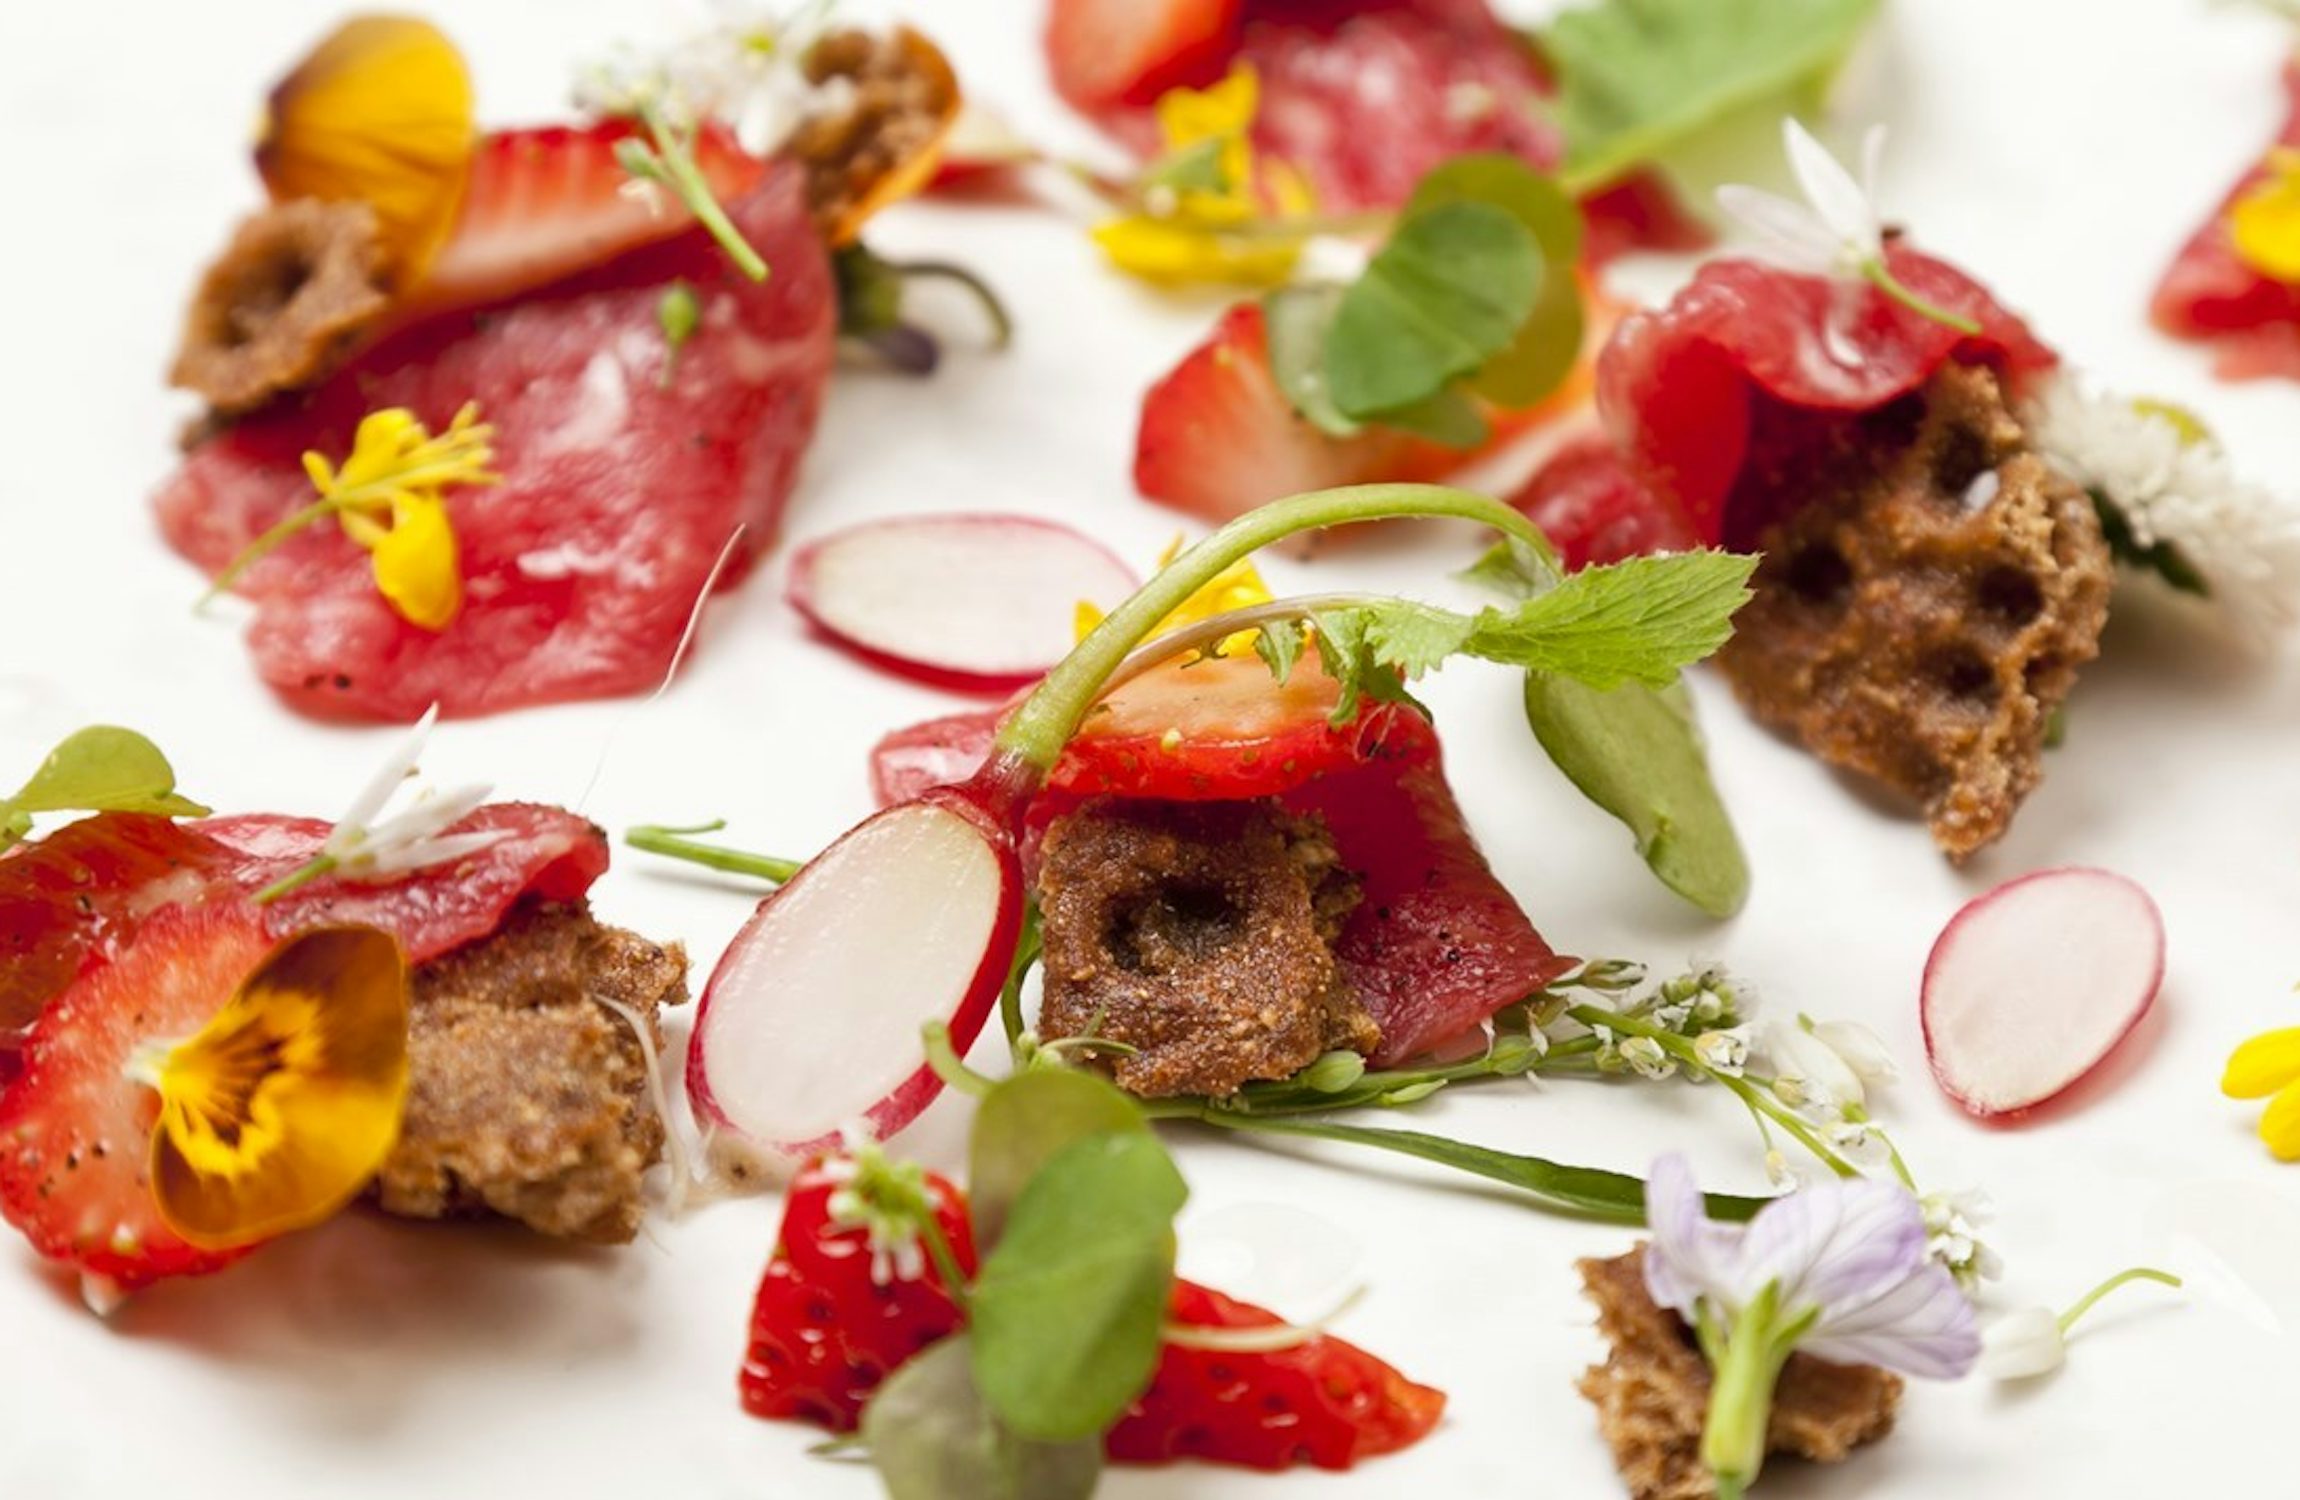 Carpaccio of Beef with pickled Strawberries, Wild Spicy Leaves & Crispbread